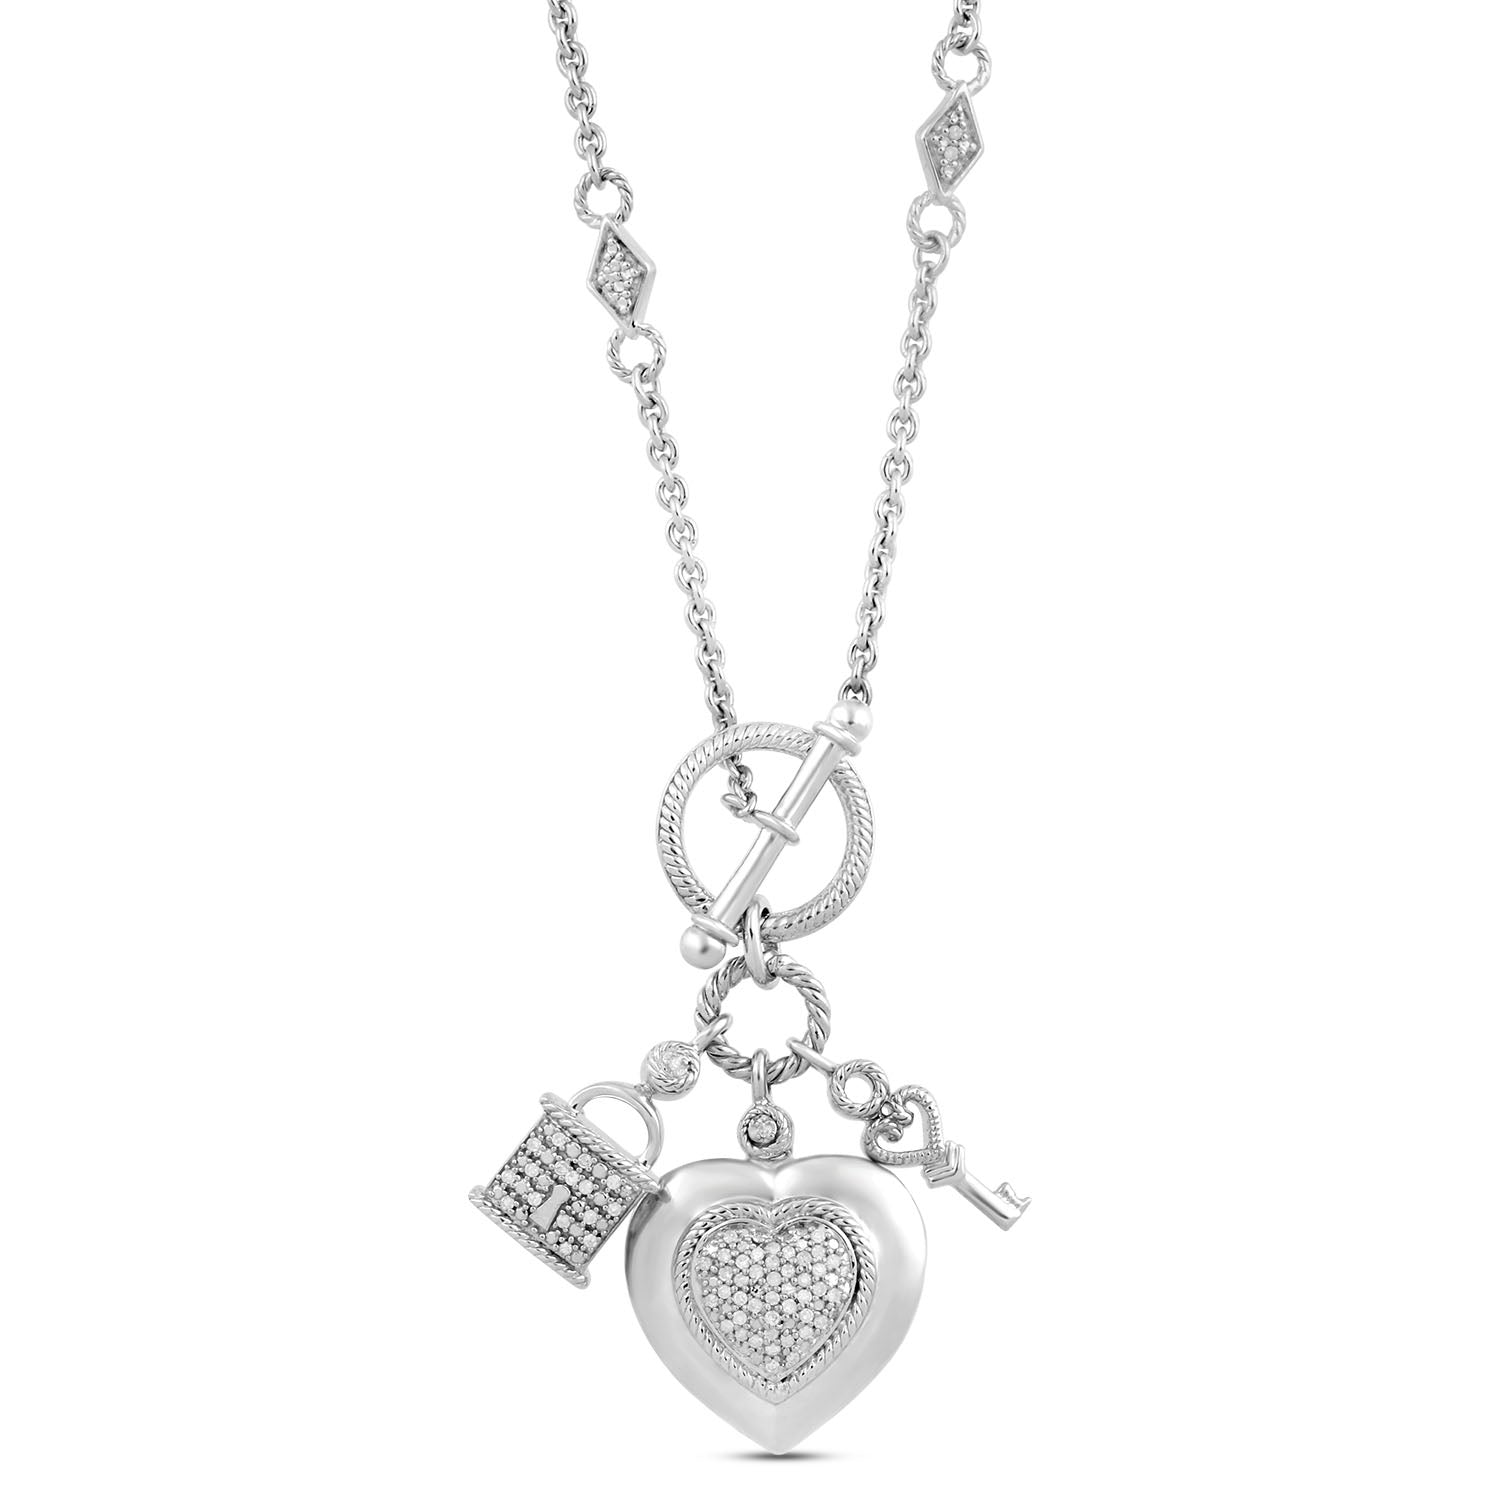 Lock and Key Necklace for Him and Her